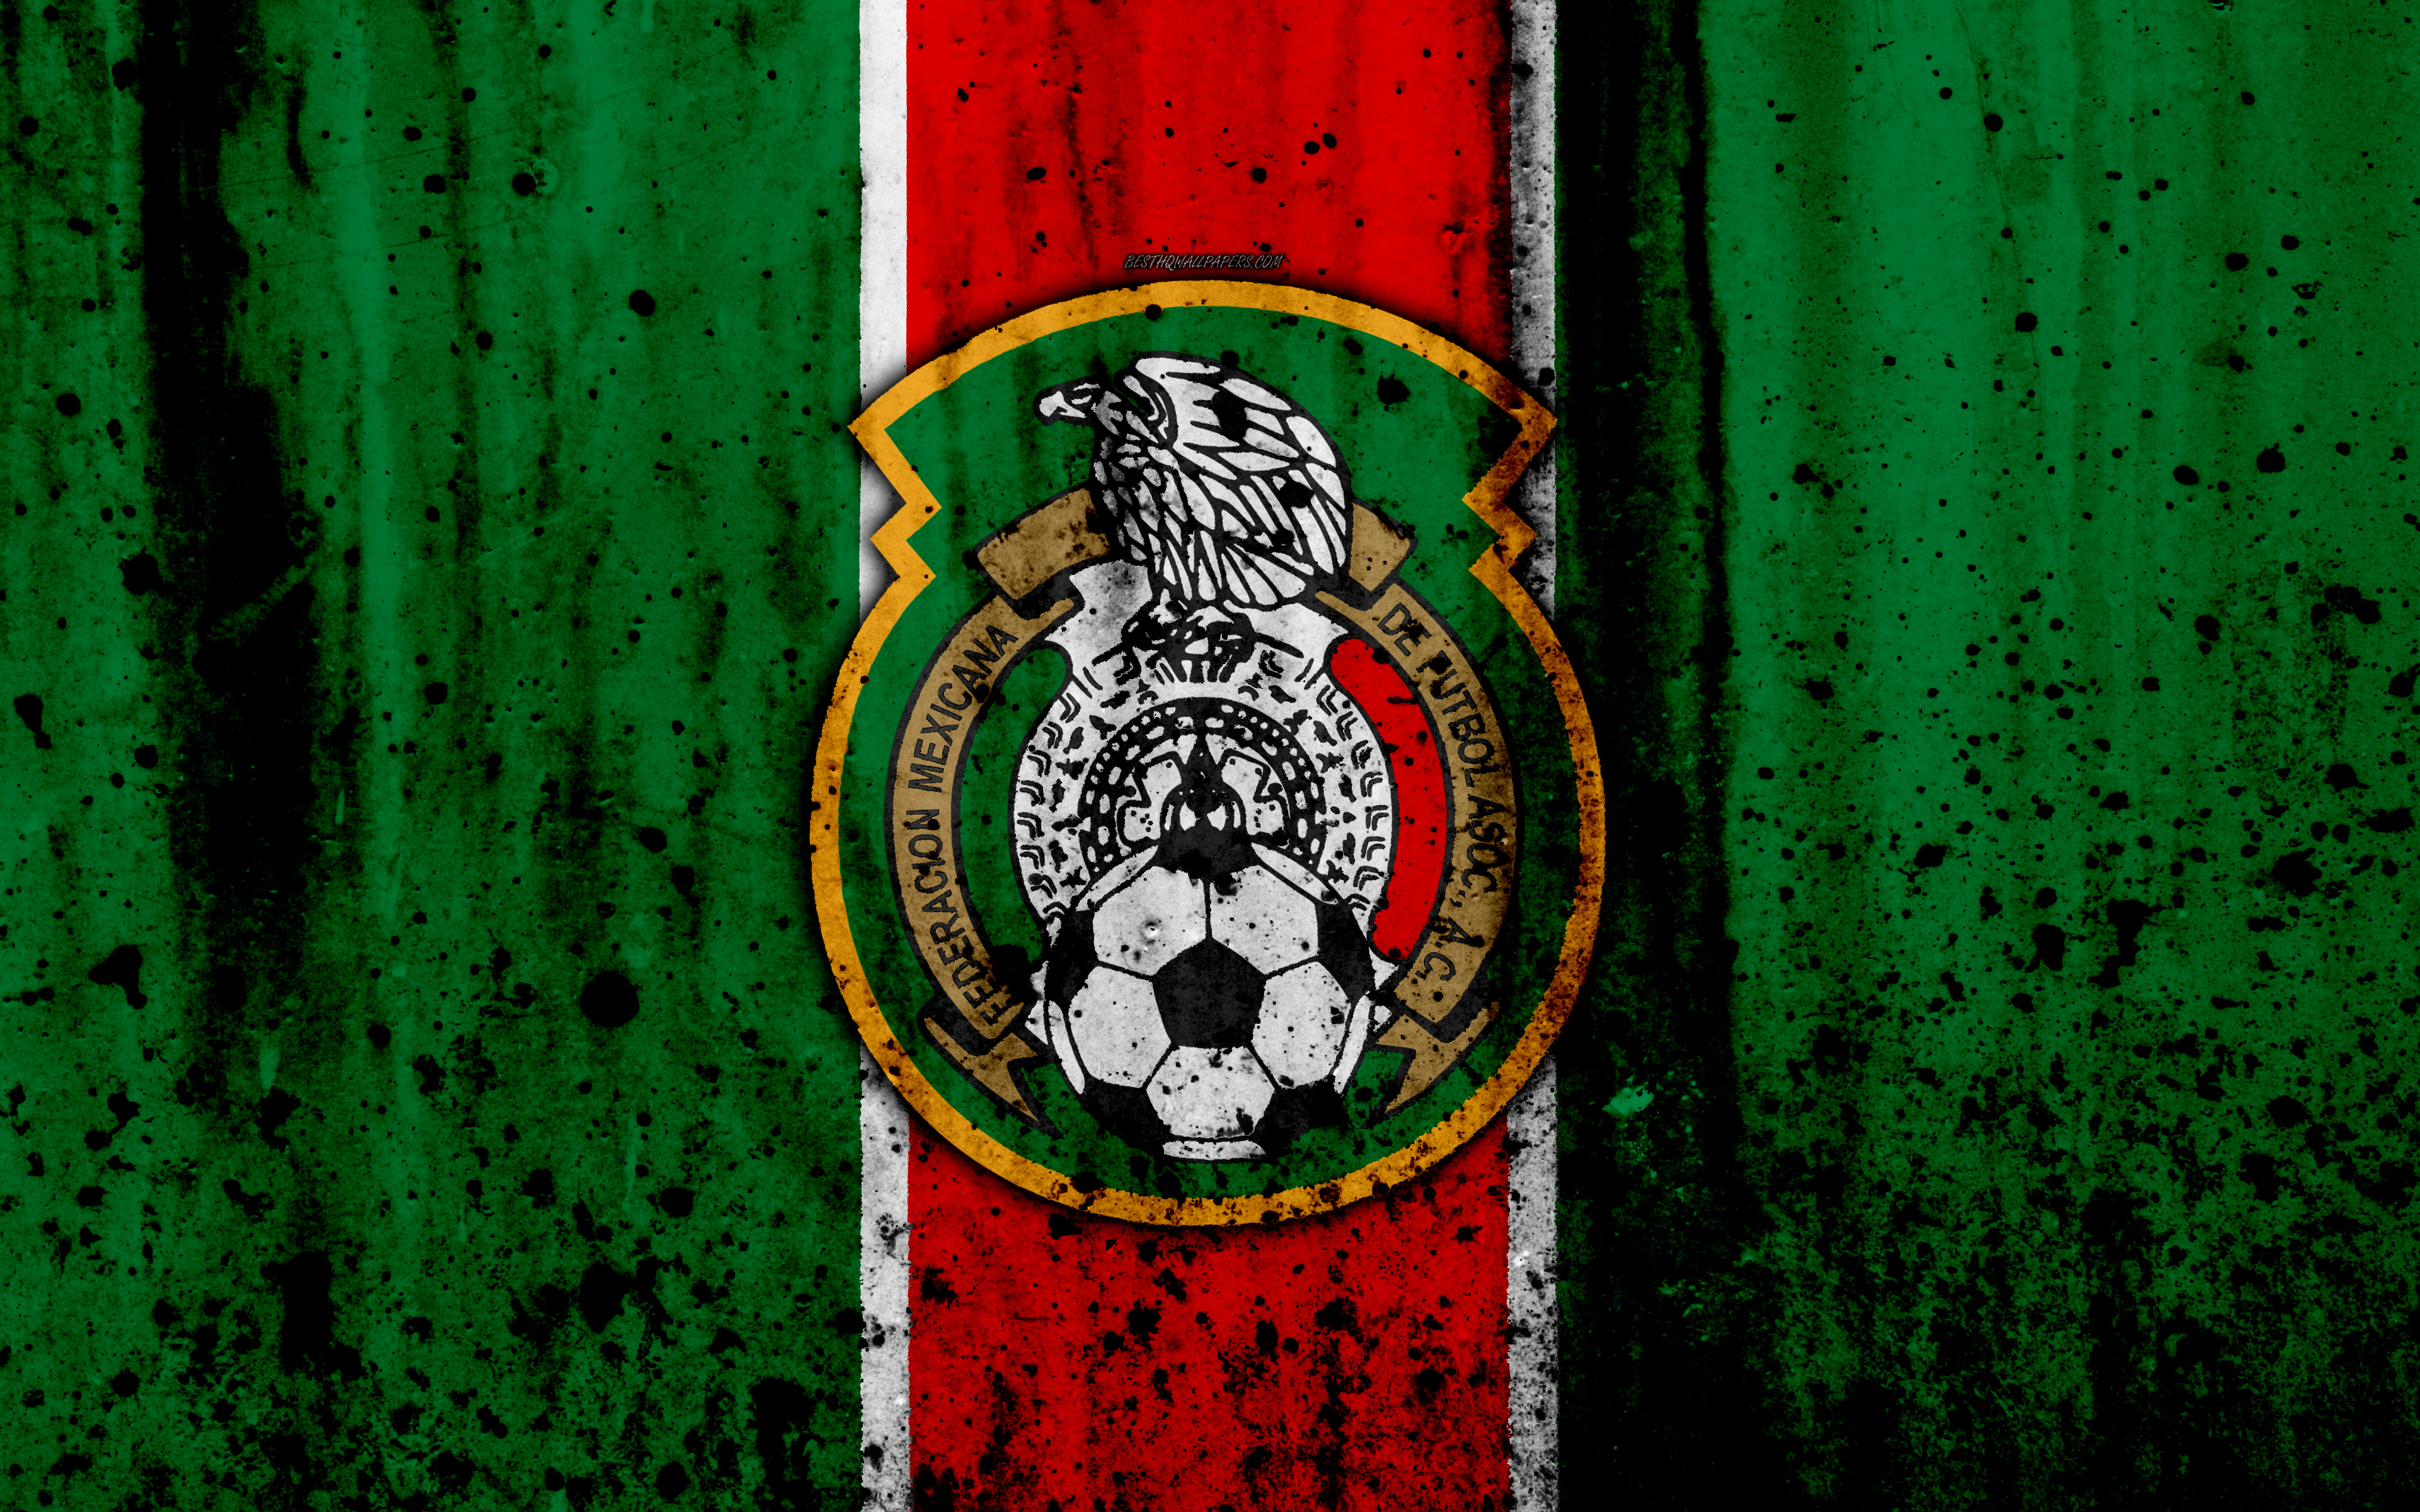 Download wallpaper Mexico national football team, 4k, emblem, grunge, North America, football, stone texture, soccer, Mexico, logo, North American national teams for desktop with resolution 3840x2400. High Quality HD picture wallpaper